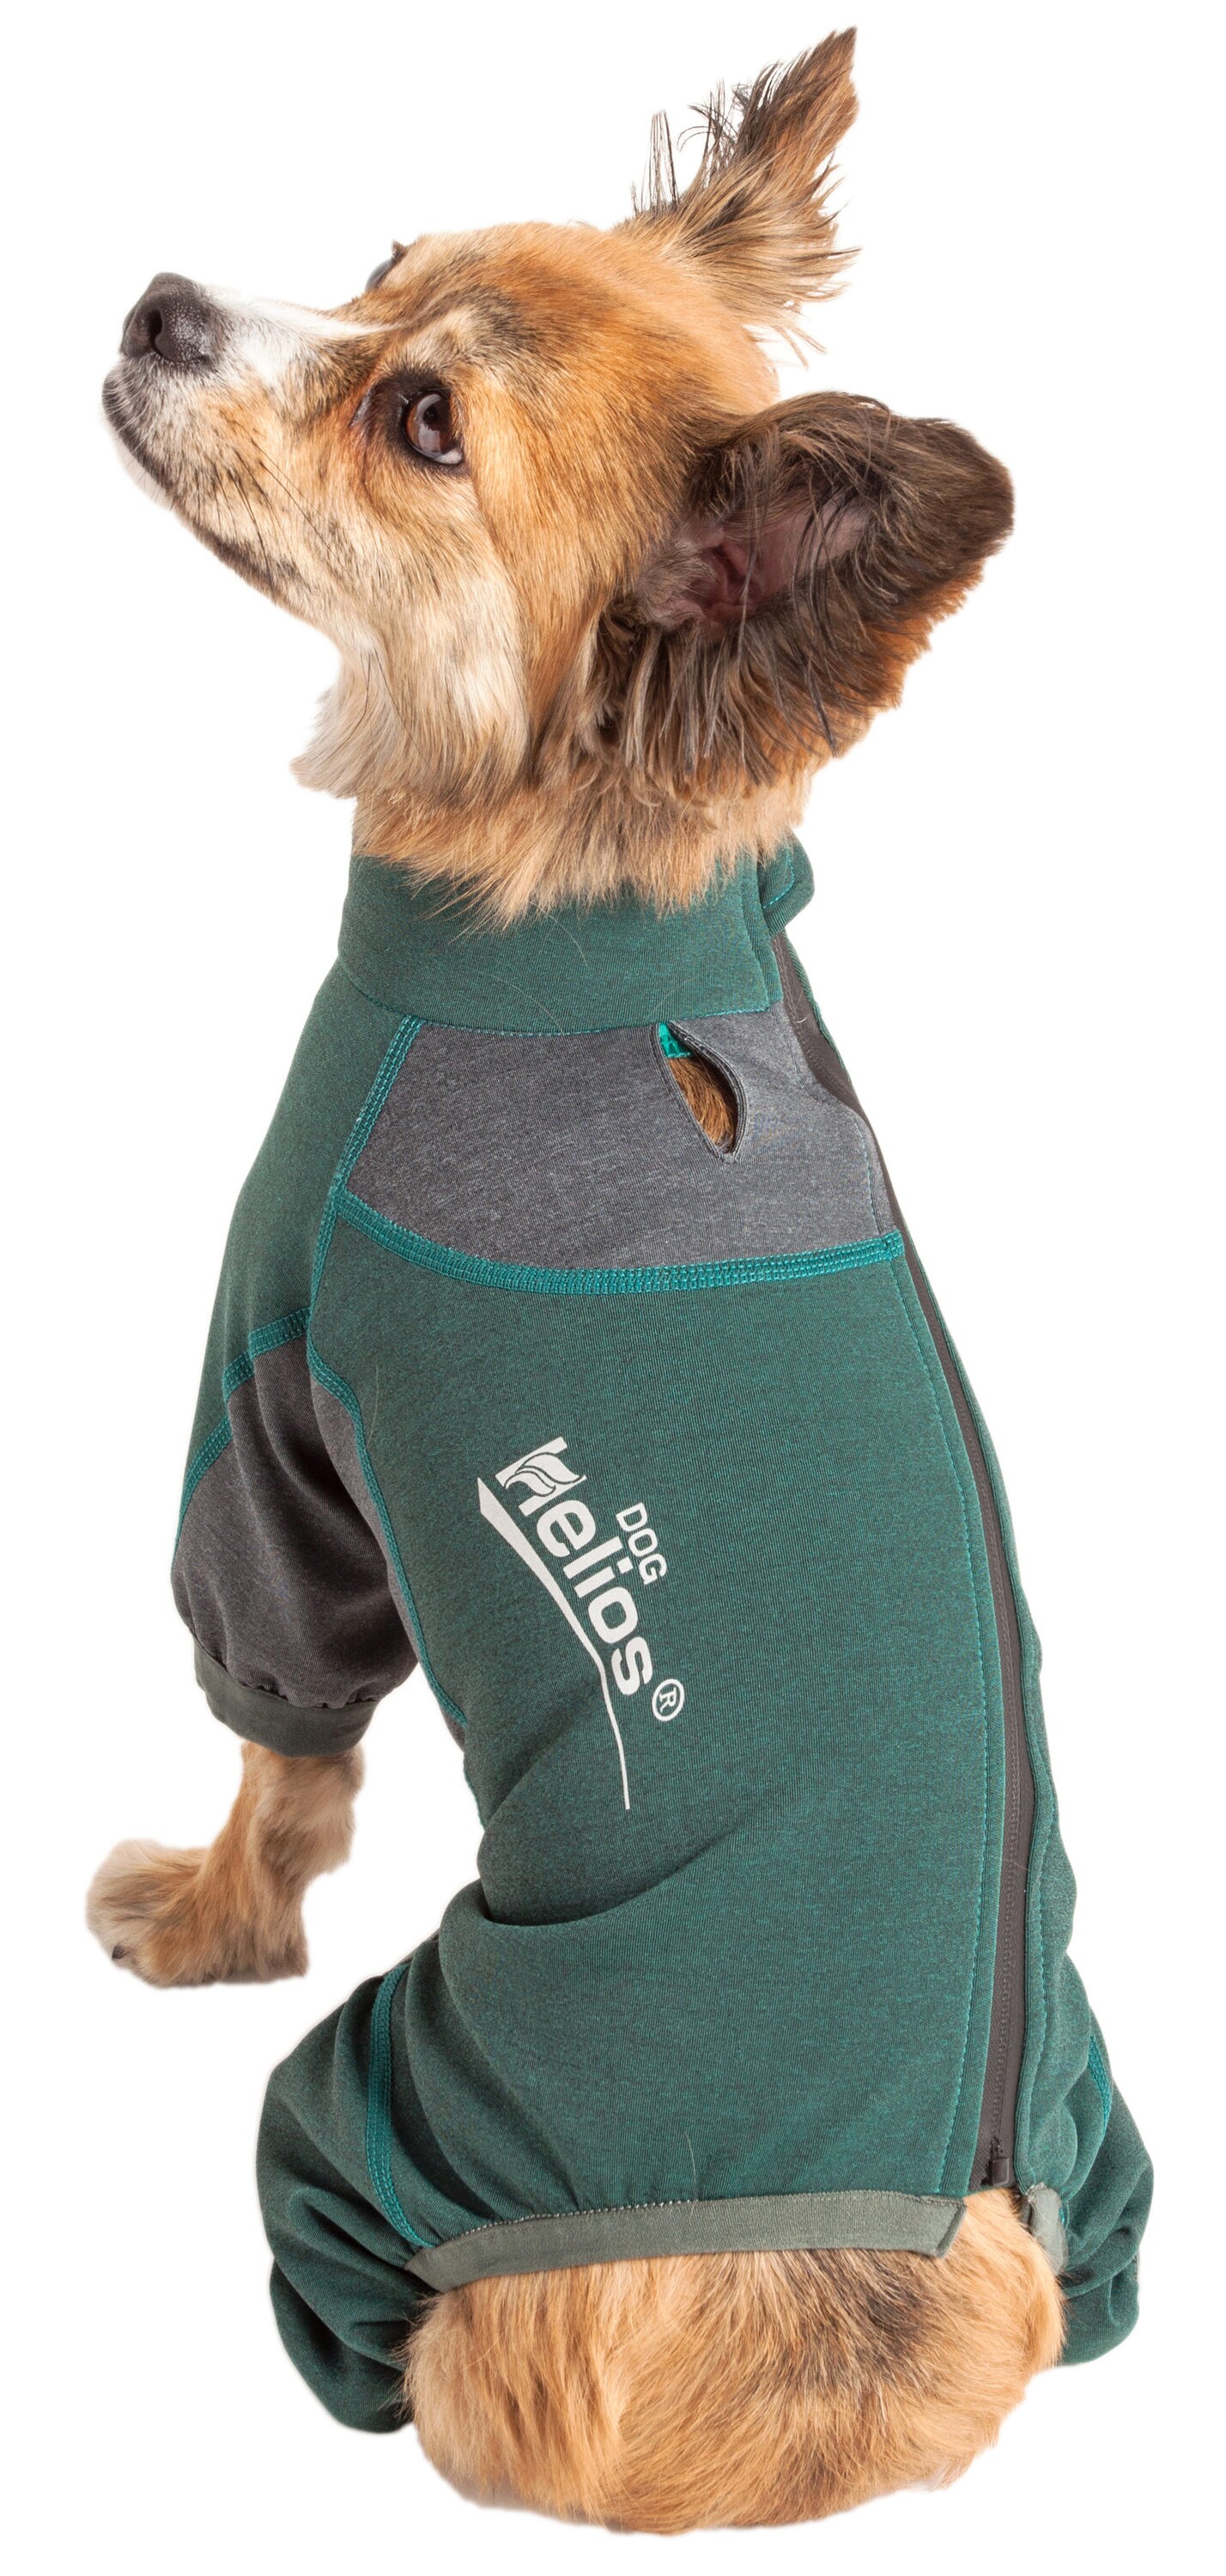 Free Country Multi-Color Polyester Pet Jacket - Medium Size -  Indoor/Outdoor - Comfortable, Warm, Lightweight - Lowe's Exclusive in the Pet  Clothing department at